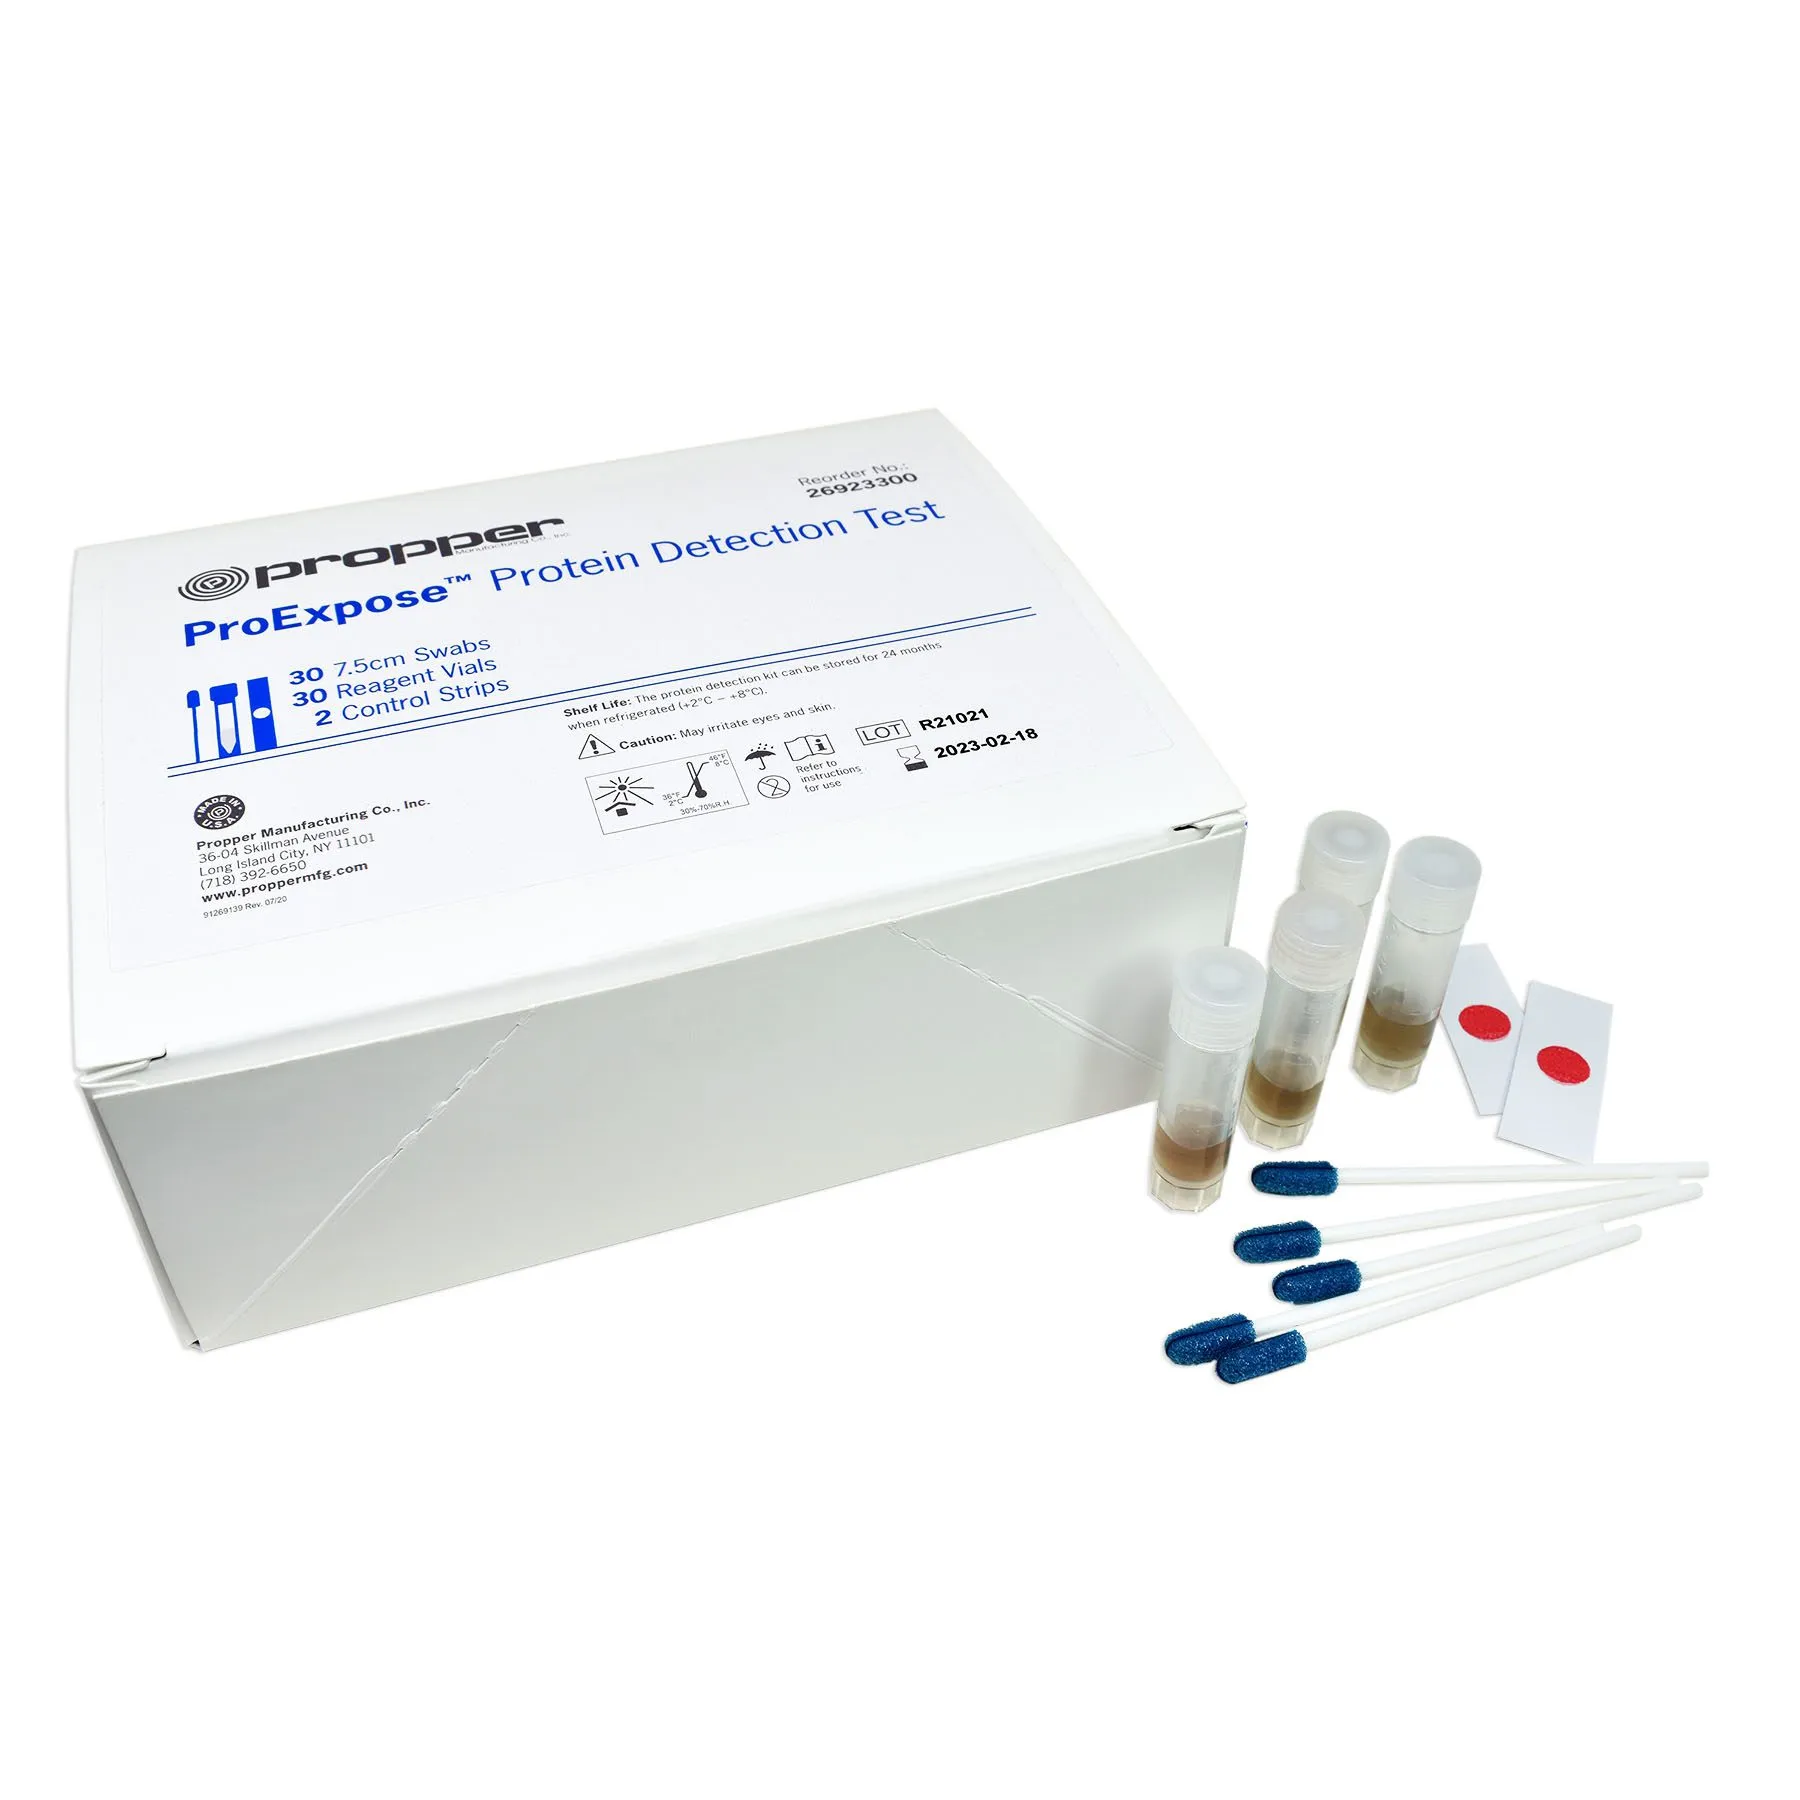 Propper - From: 26923300 To: 26923400 - Manufacturing Proexpose Short Swab Protein Test